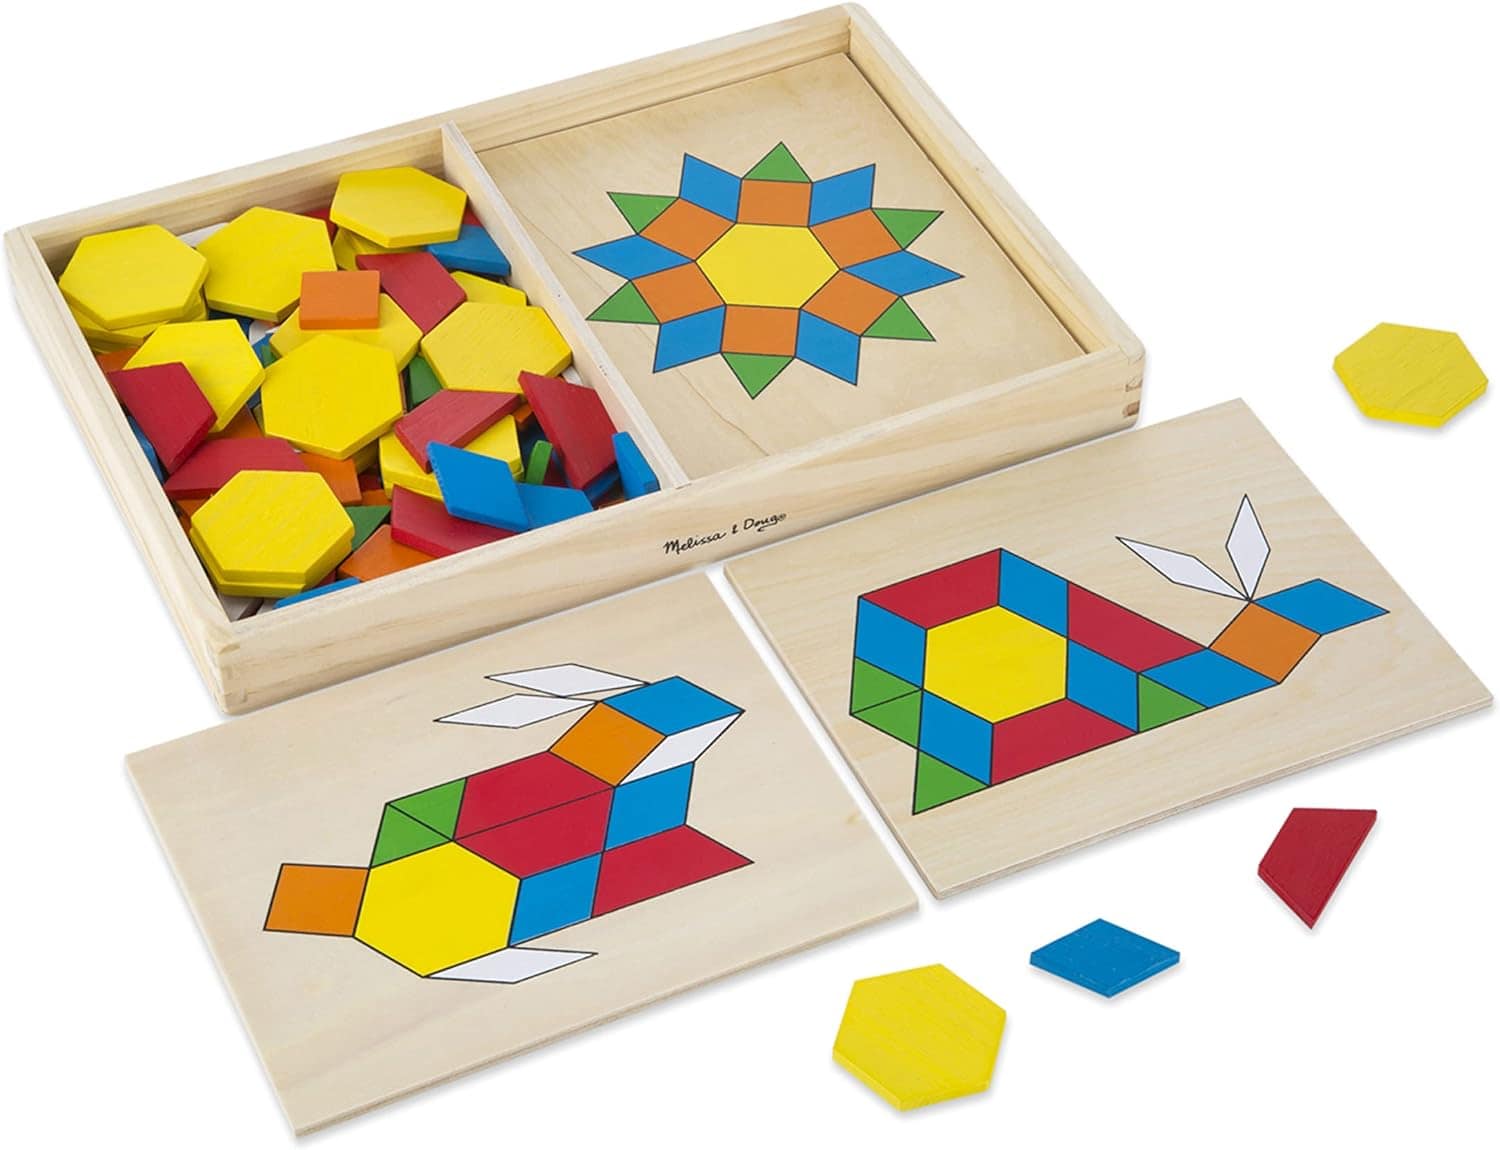 Melissa & Doug Pattern Blocks and Boards - Wooden Classic Toy With 120 Solid Wood Shapes and 5 Double-Sided Panels